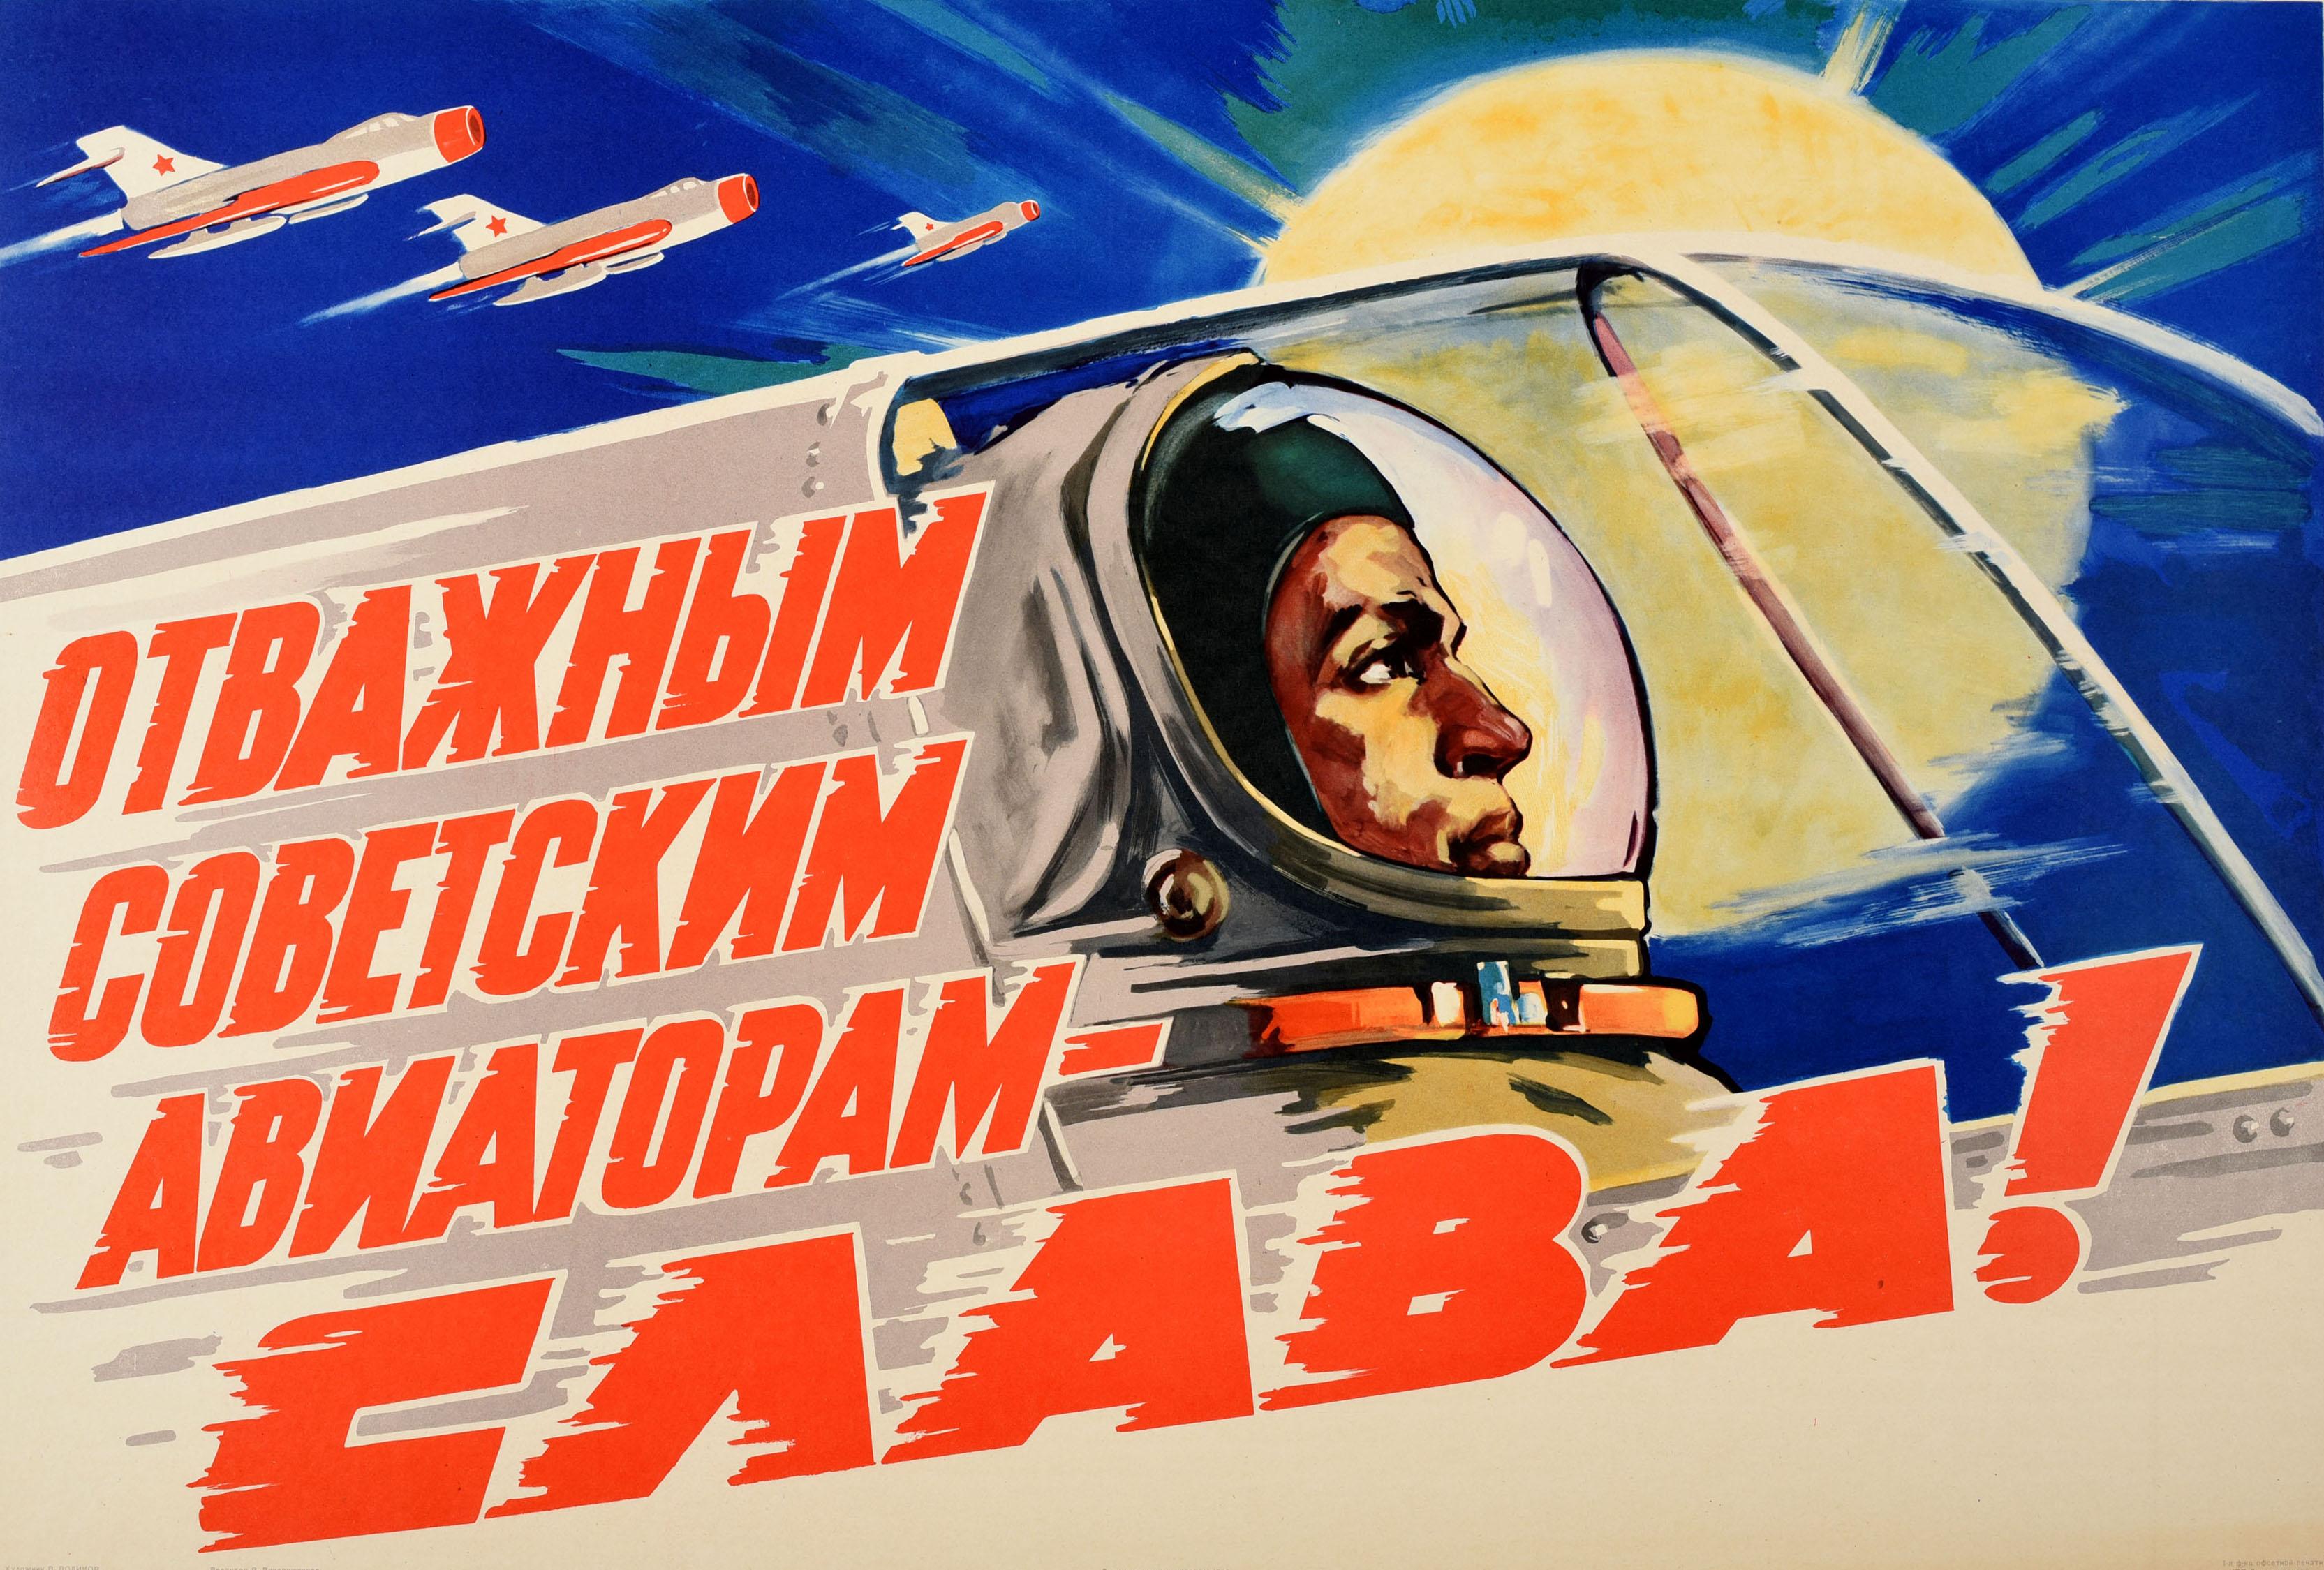 Original vintage Soviet propaganda poster - Glory to the brave Soviet aviators! / Отважным Советским Авиаторам - Слава! Dynamic artwork depicting a pilot flying at speed with other planes and a bright sun shining against the blue sky background, the